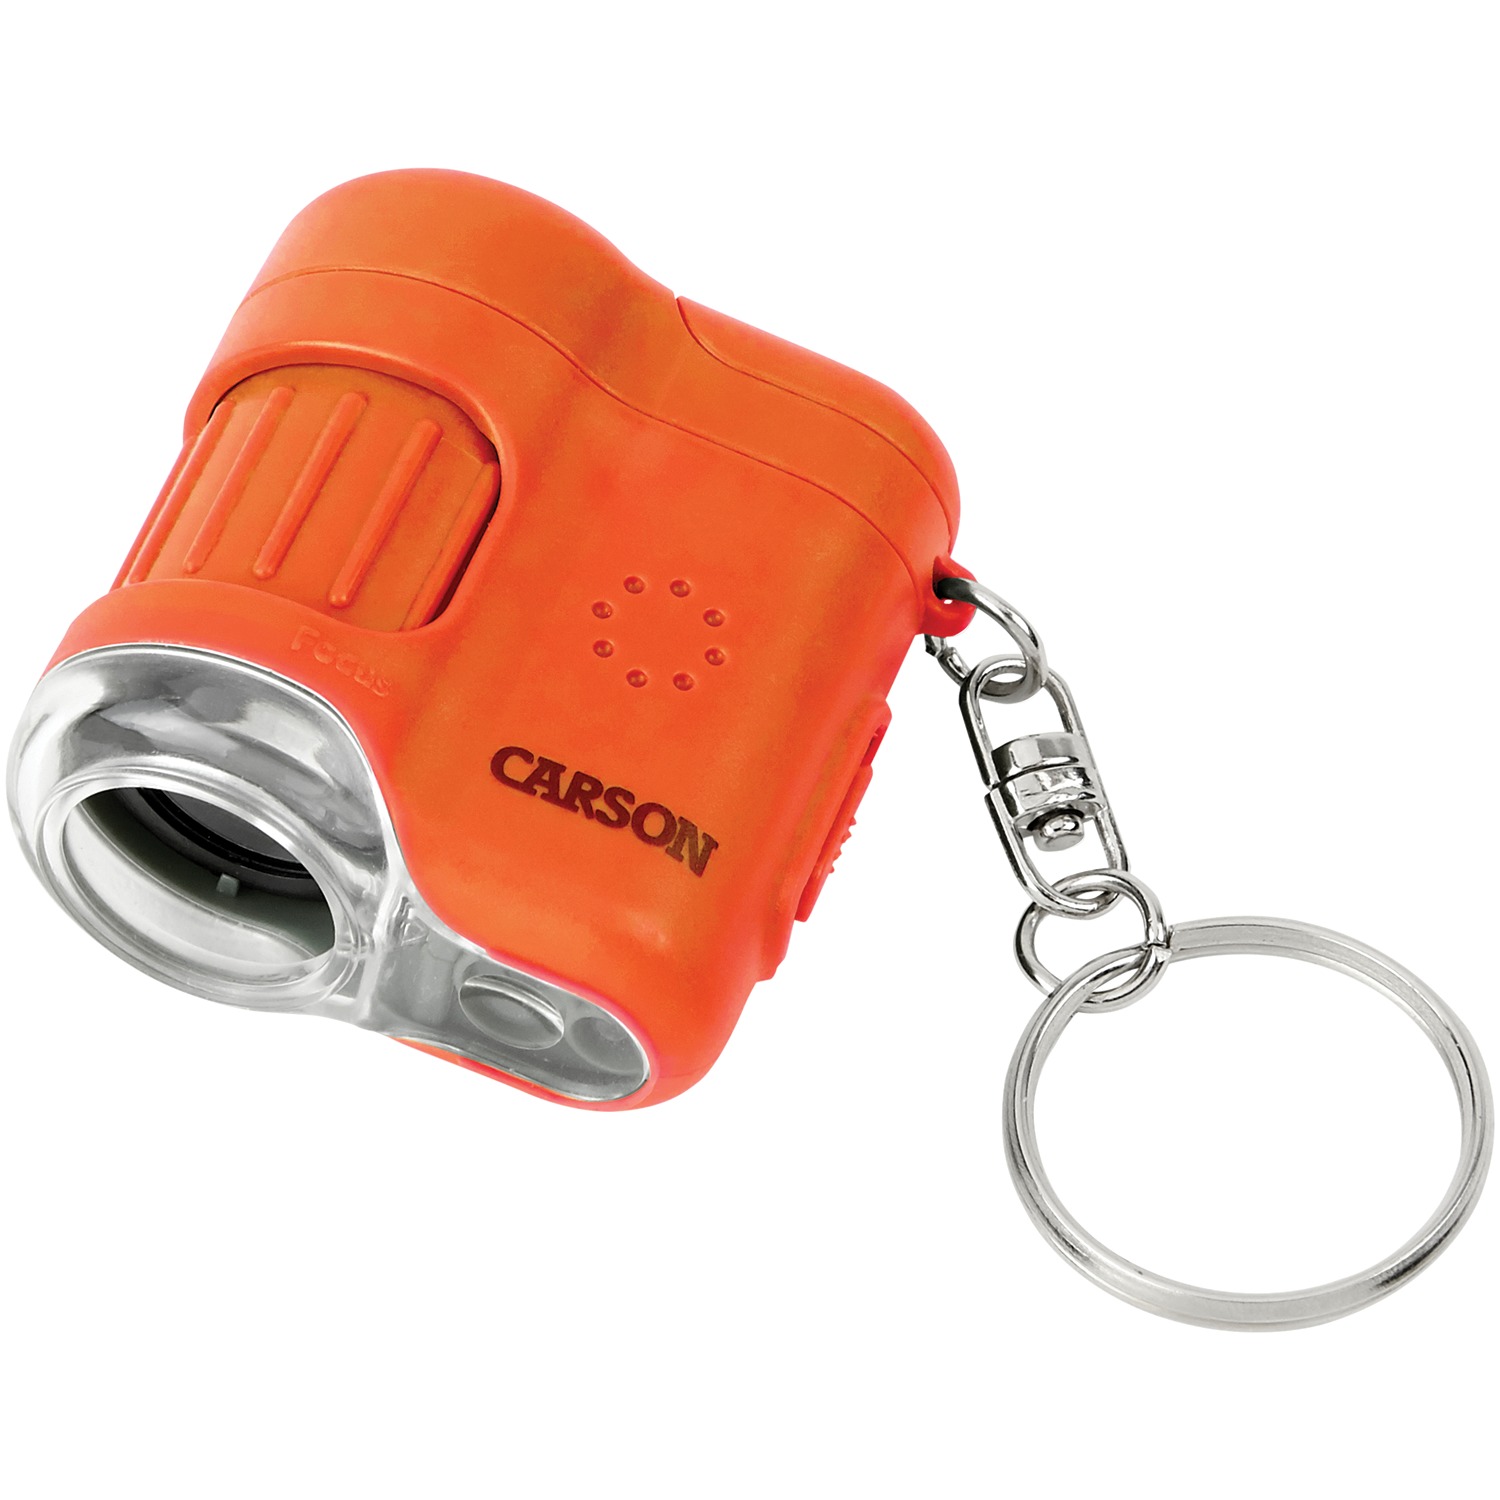 Carson MicroMini™ 20x LED Lighted Pocket Microscope with Built-In UV and LED Flashlight, Orange - image 5 of 9